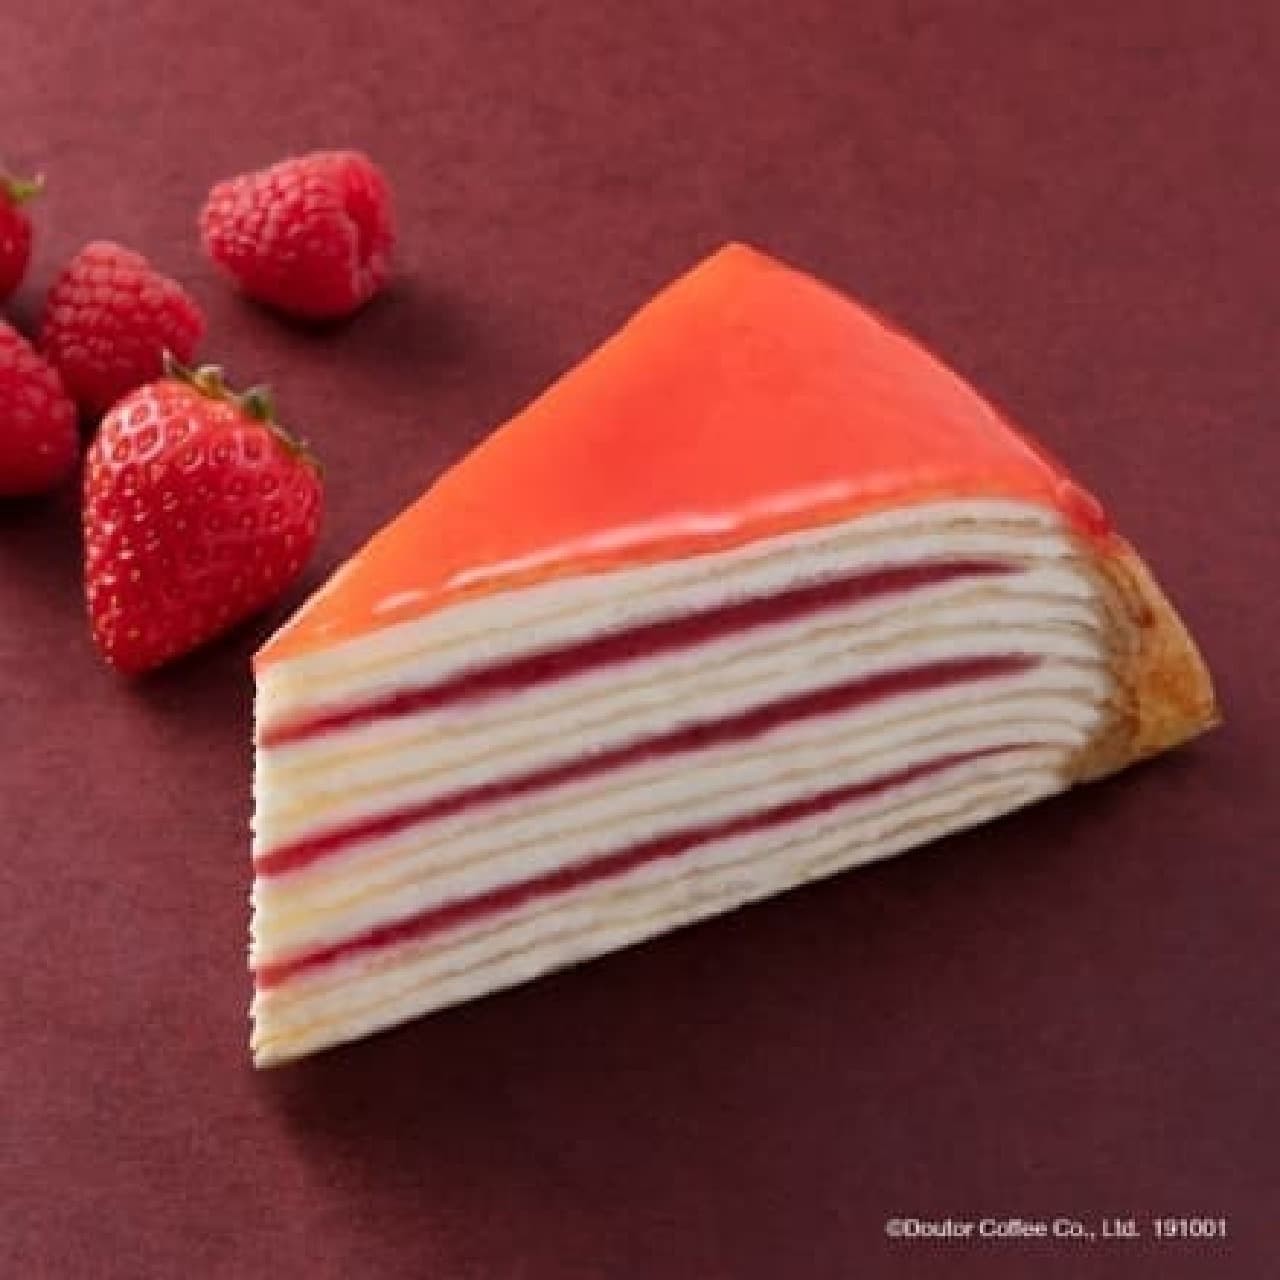 "Strawberry and raspberry mille crêpes" at Doutor Coffee Shop